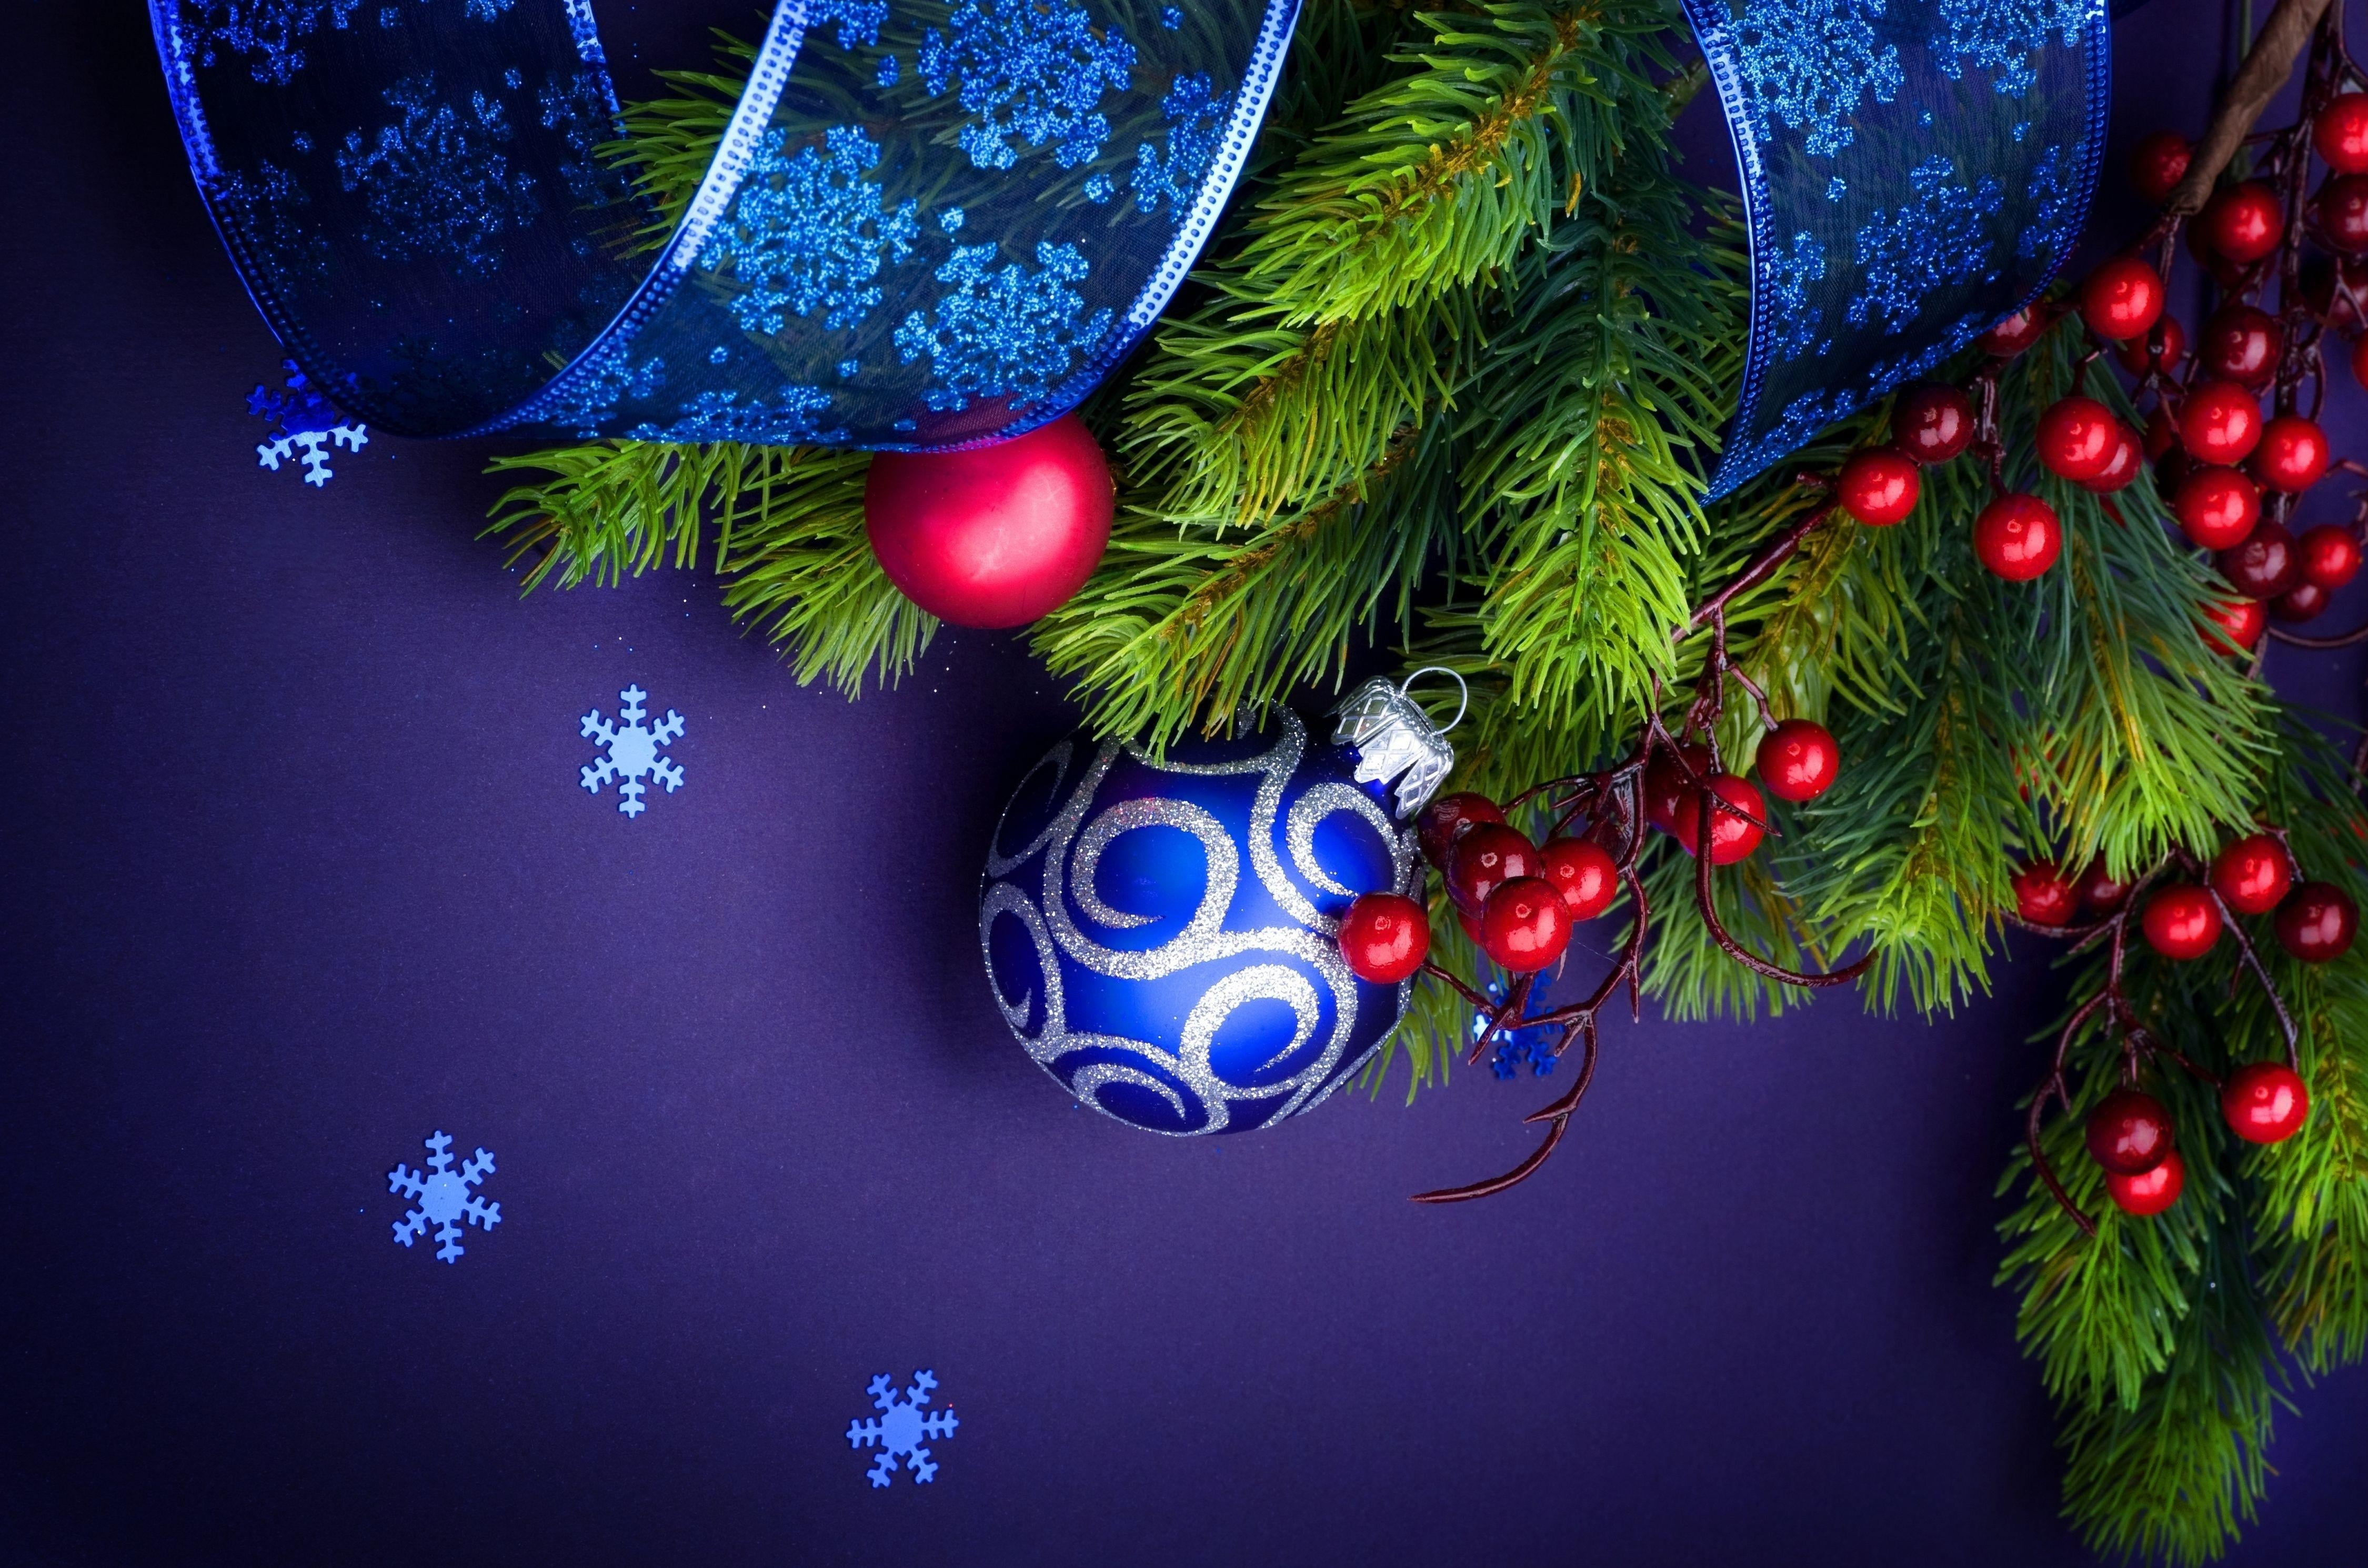 blue and silver bauble ornament